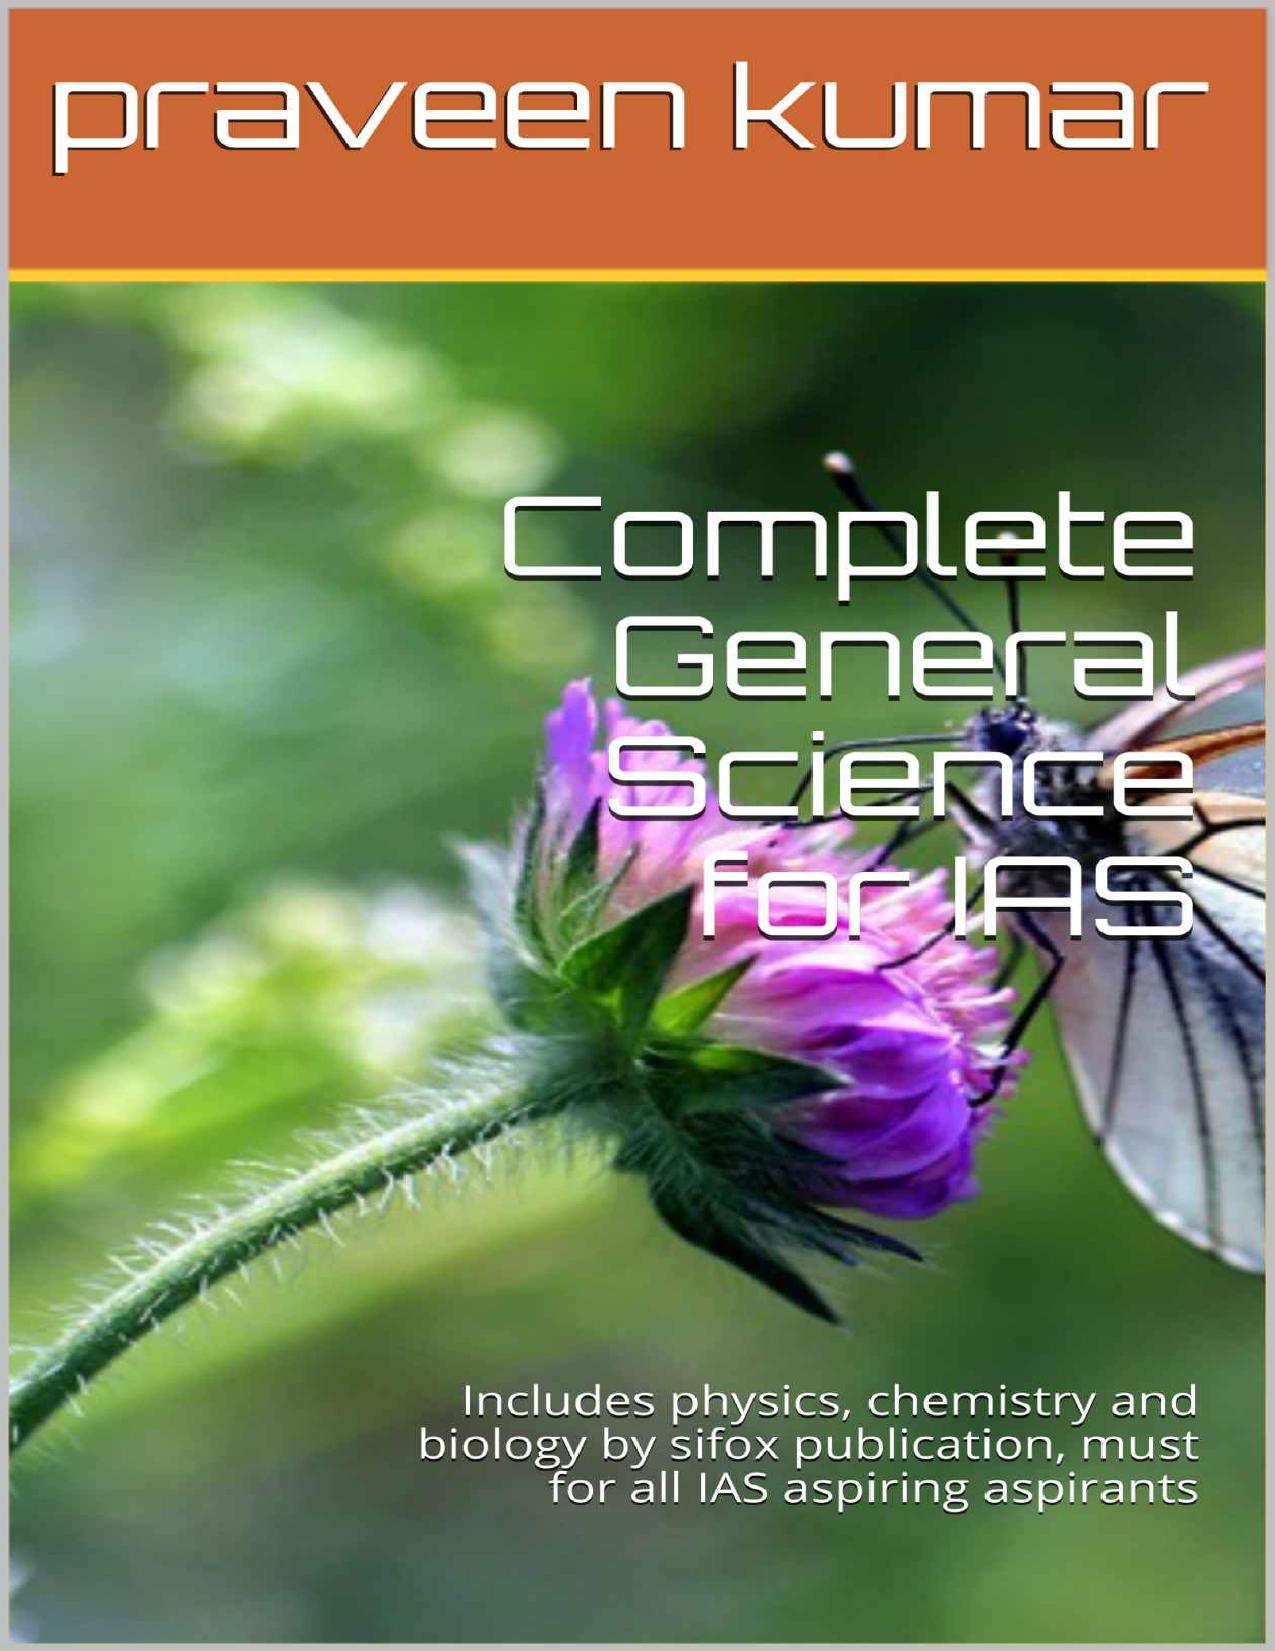 Complete General Science for IAS: Includes physics, chemistry and biology by sifox publication, must for all IAS aspiring aspirants